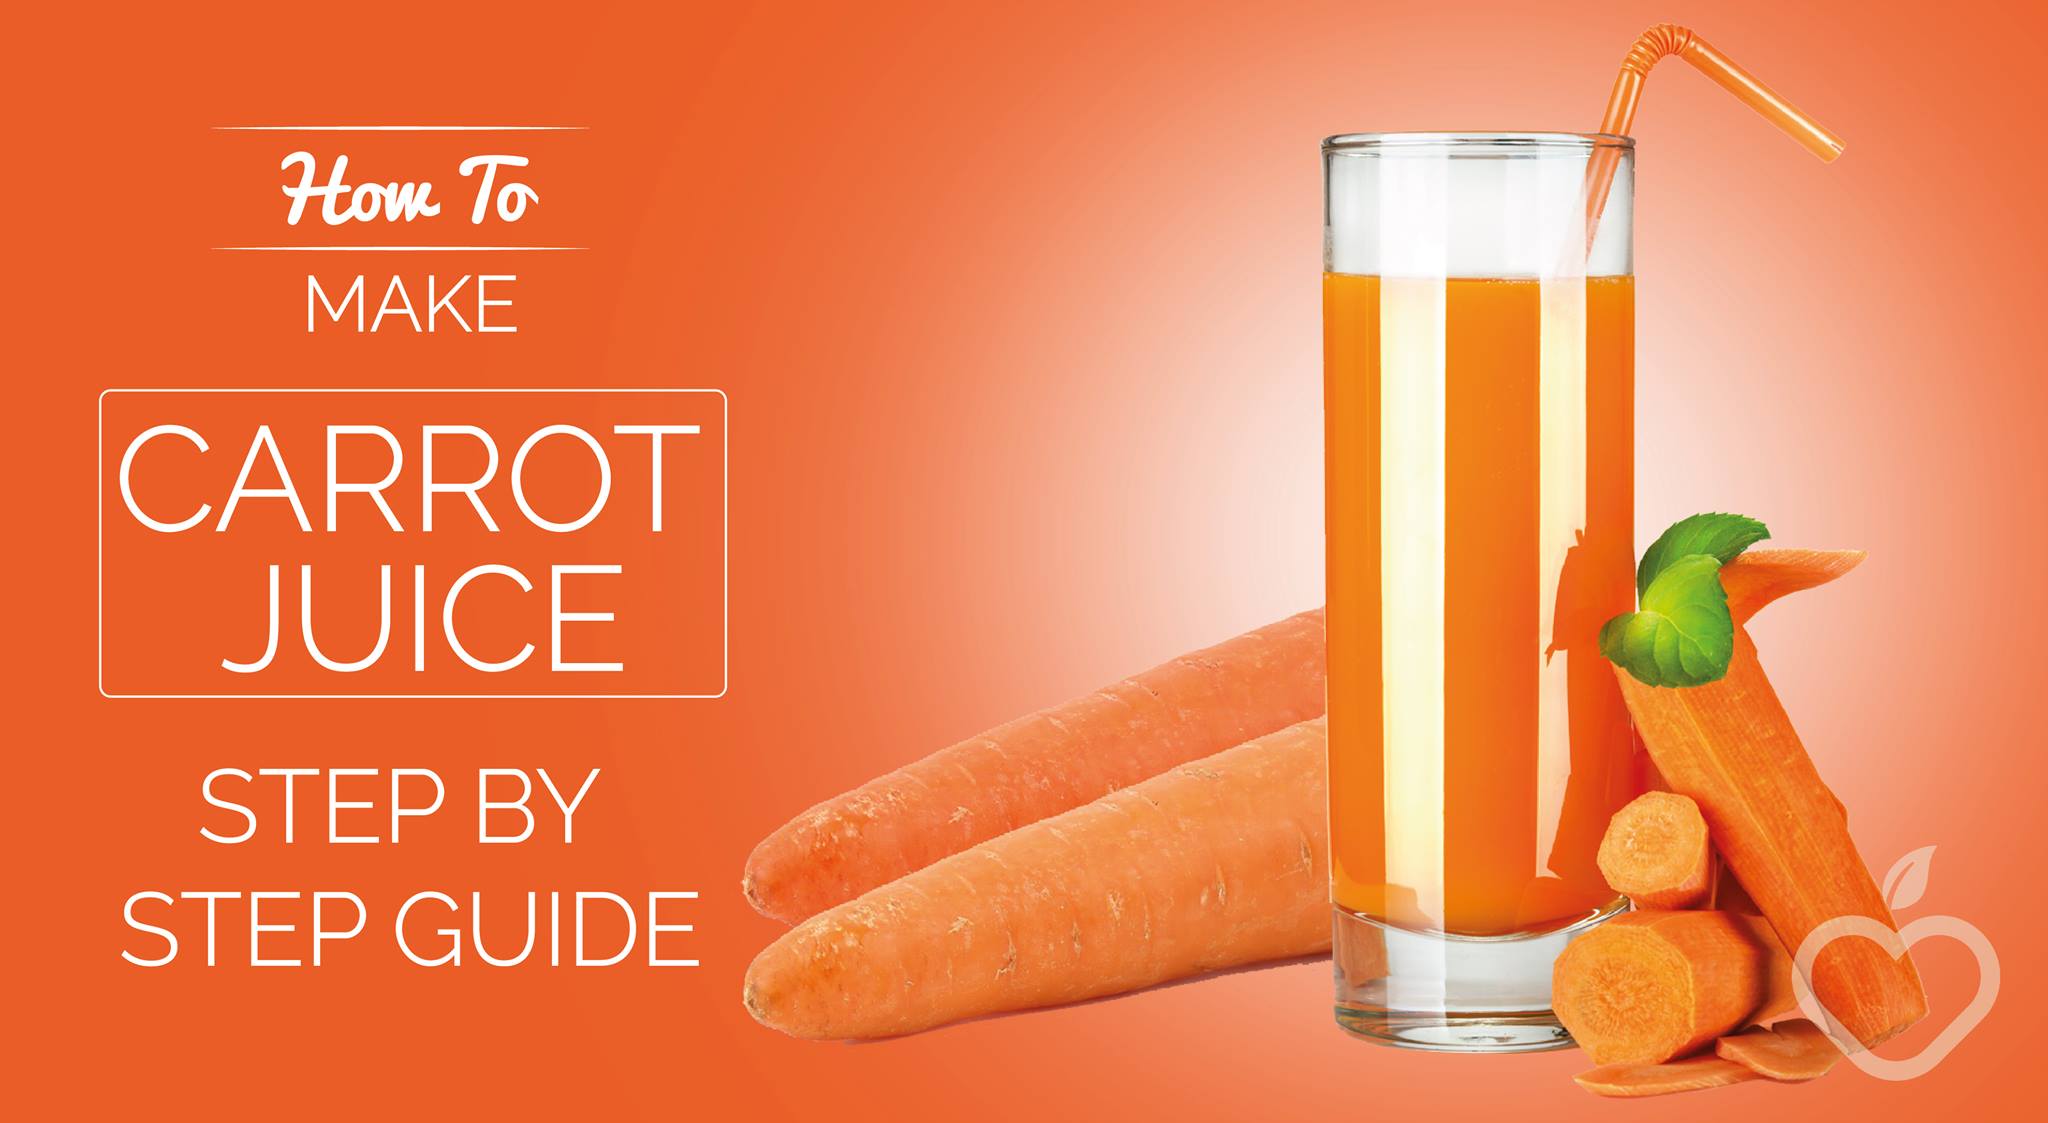 How To Make Carrot Juice (Step By Step Guide)